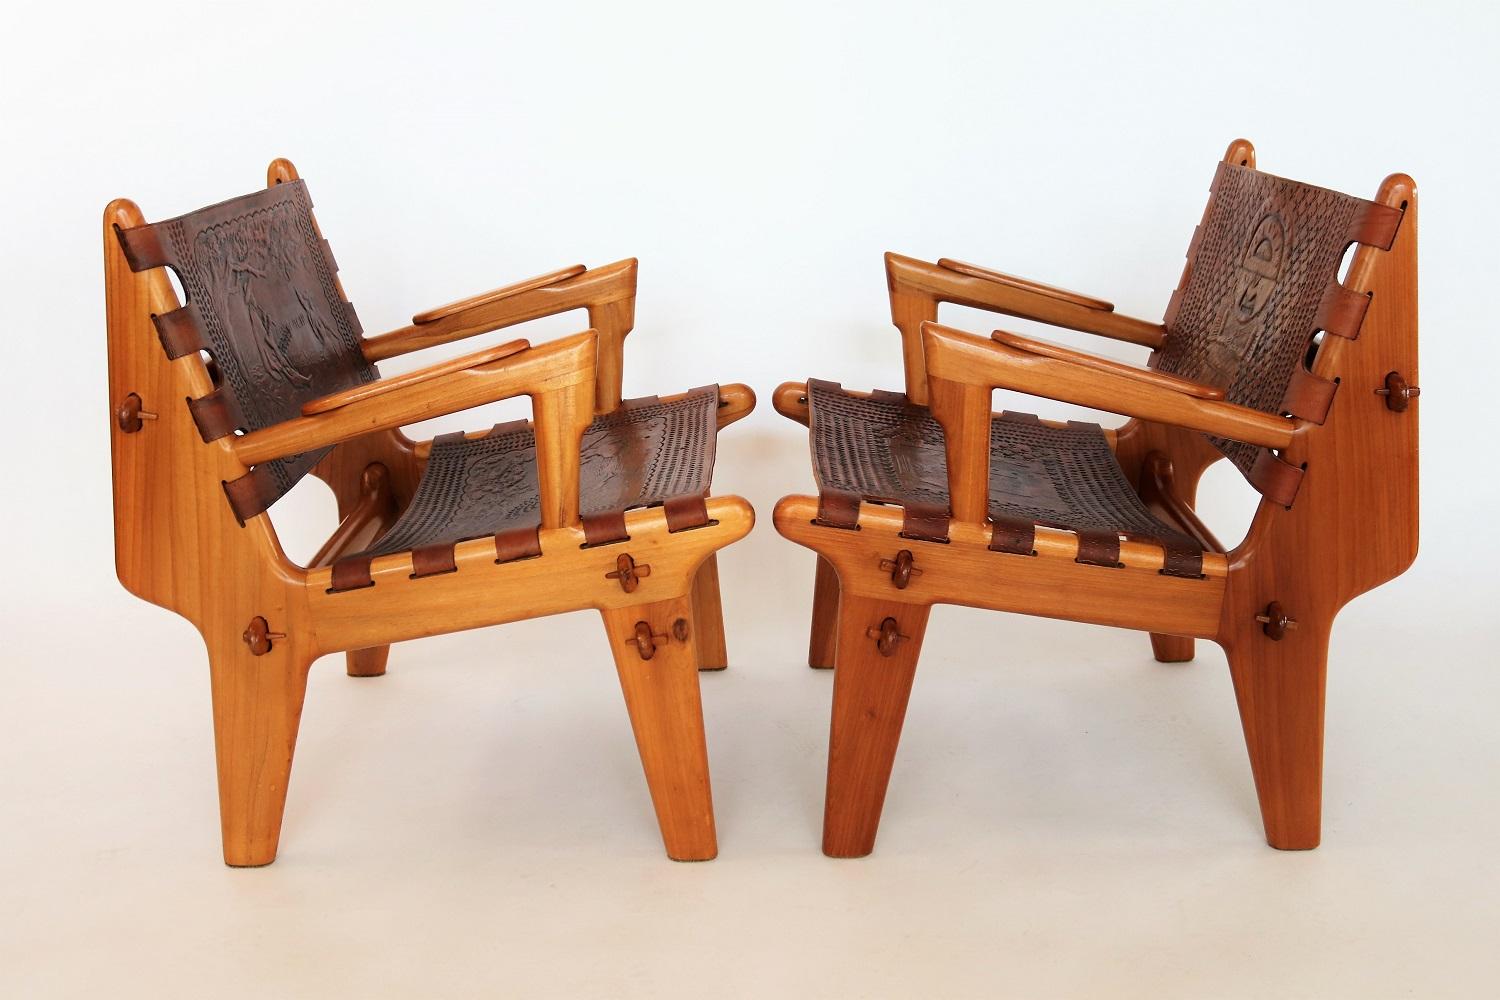 Beautiful pair of armchairs designed by Angel I Pazmino for Muebles De Estilo, Ecuador, circa 1960s.
Both armchairs are made of cherrywood and thick leather and are slightly different from each other in color.
The leather is fixed with wooden stakes